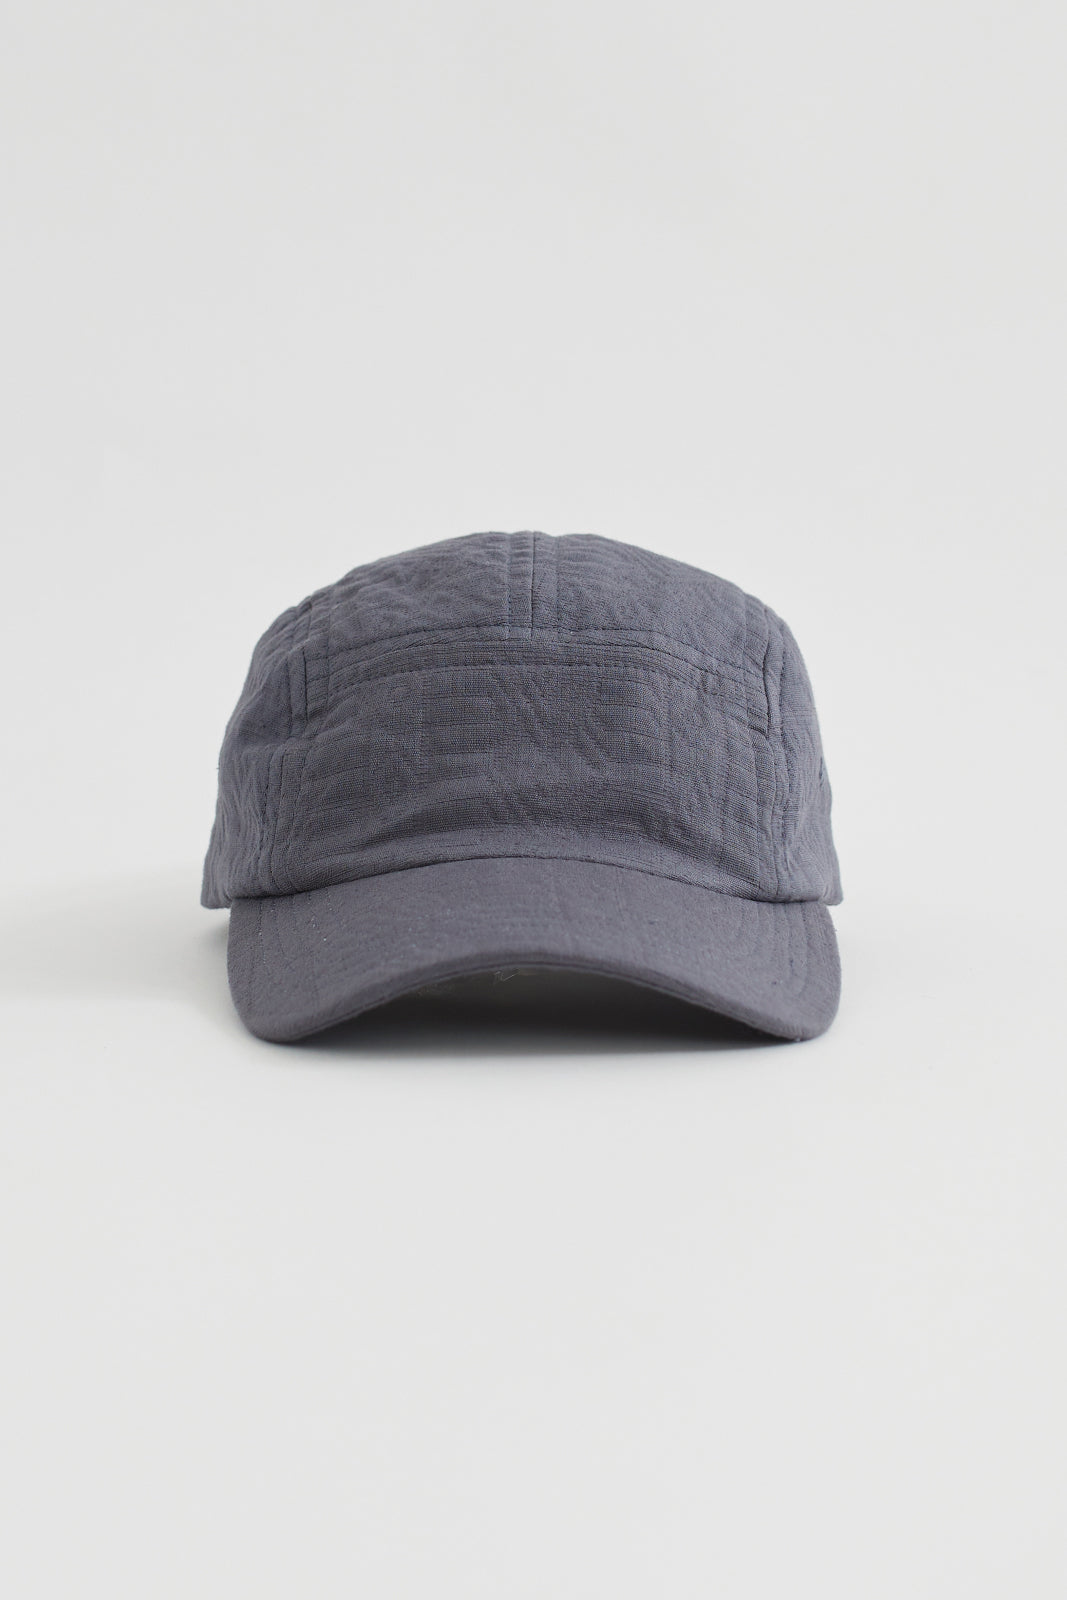 SUMMIT CAMP HAT - WASHED CHARCOAL HANDLOOM DOUBLE WEAVE